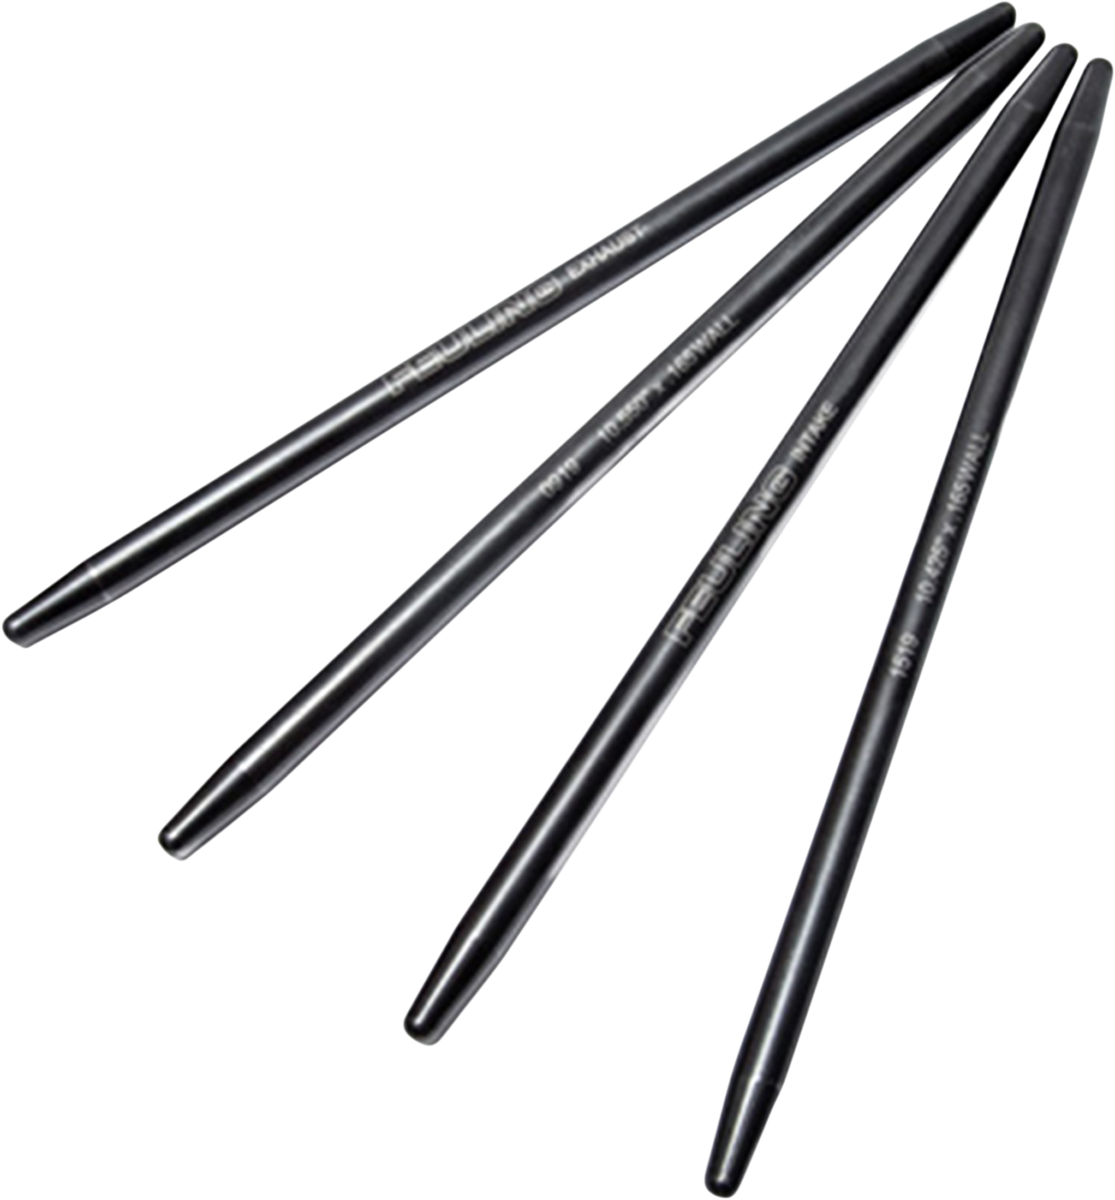 Feuling HP+ Motorcycle Pushrods 1999-2017 Harley Dyna Softail Touring Models